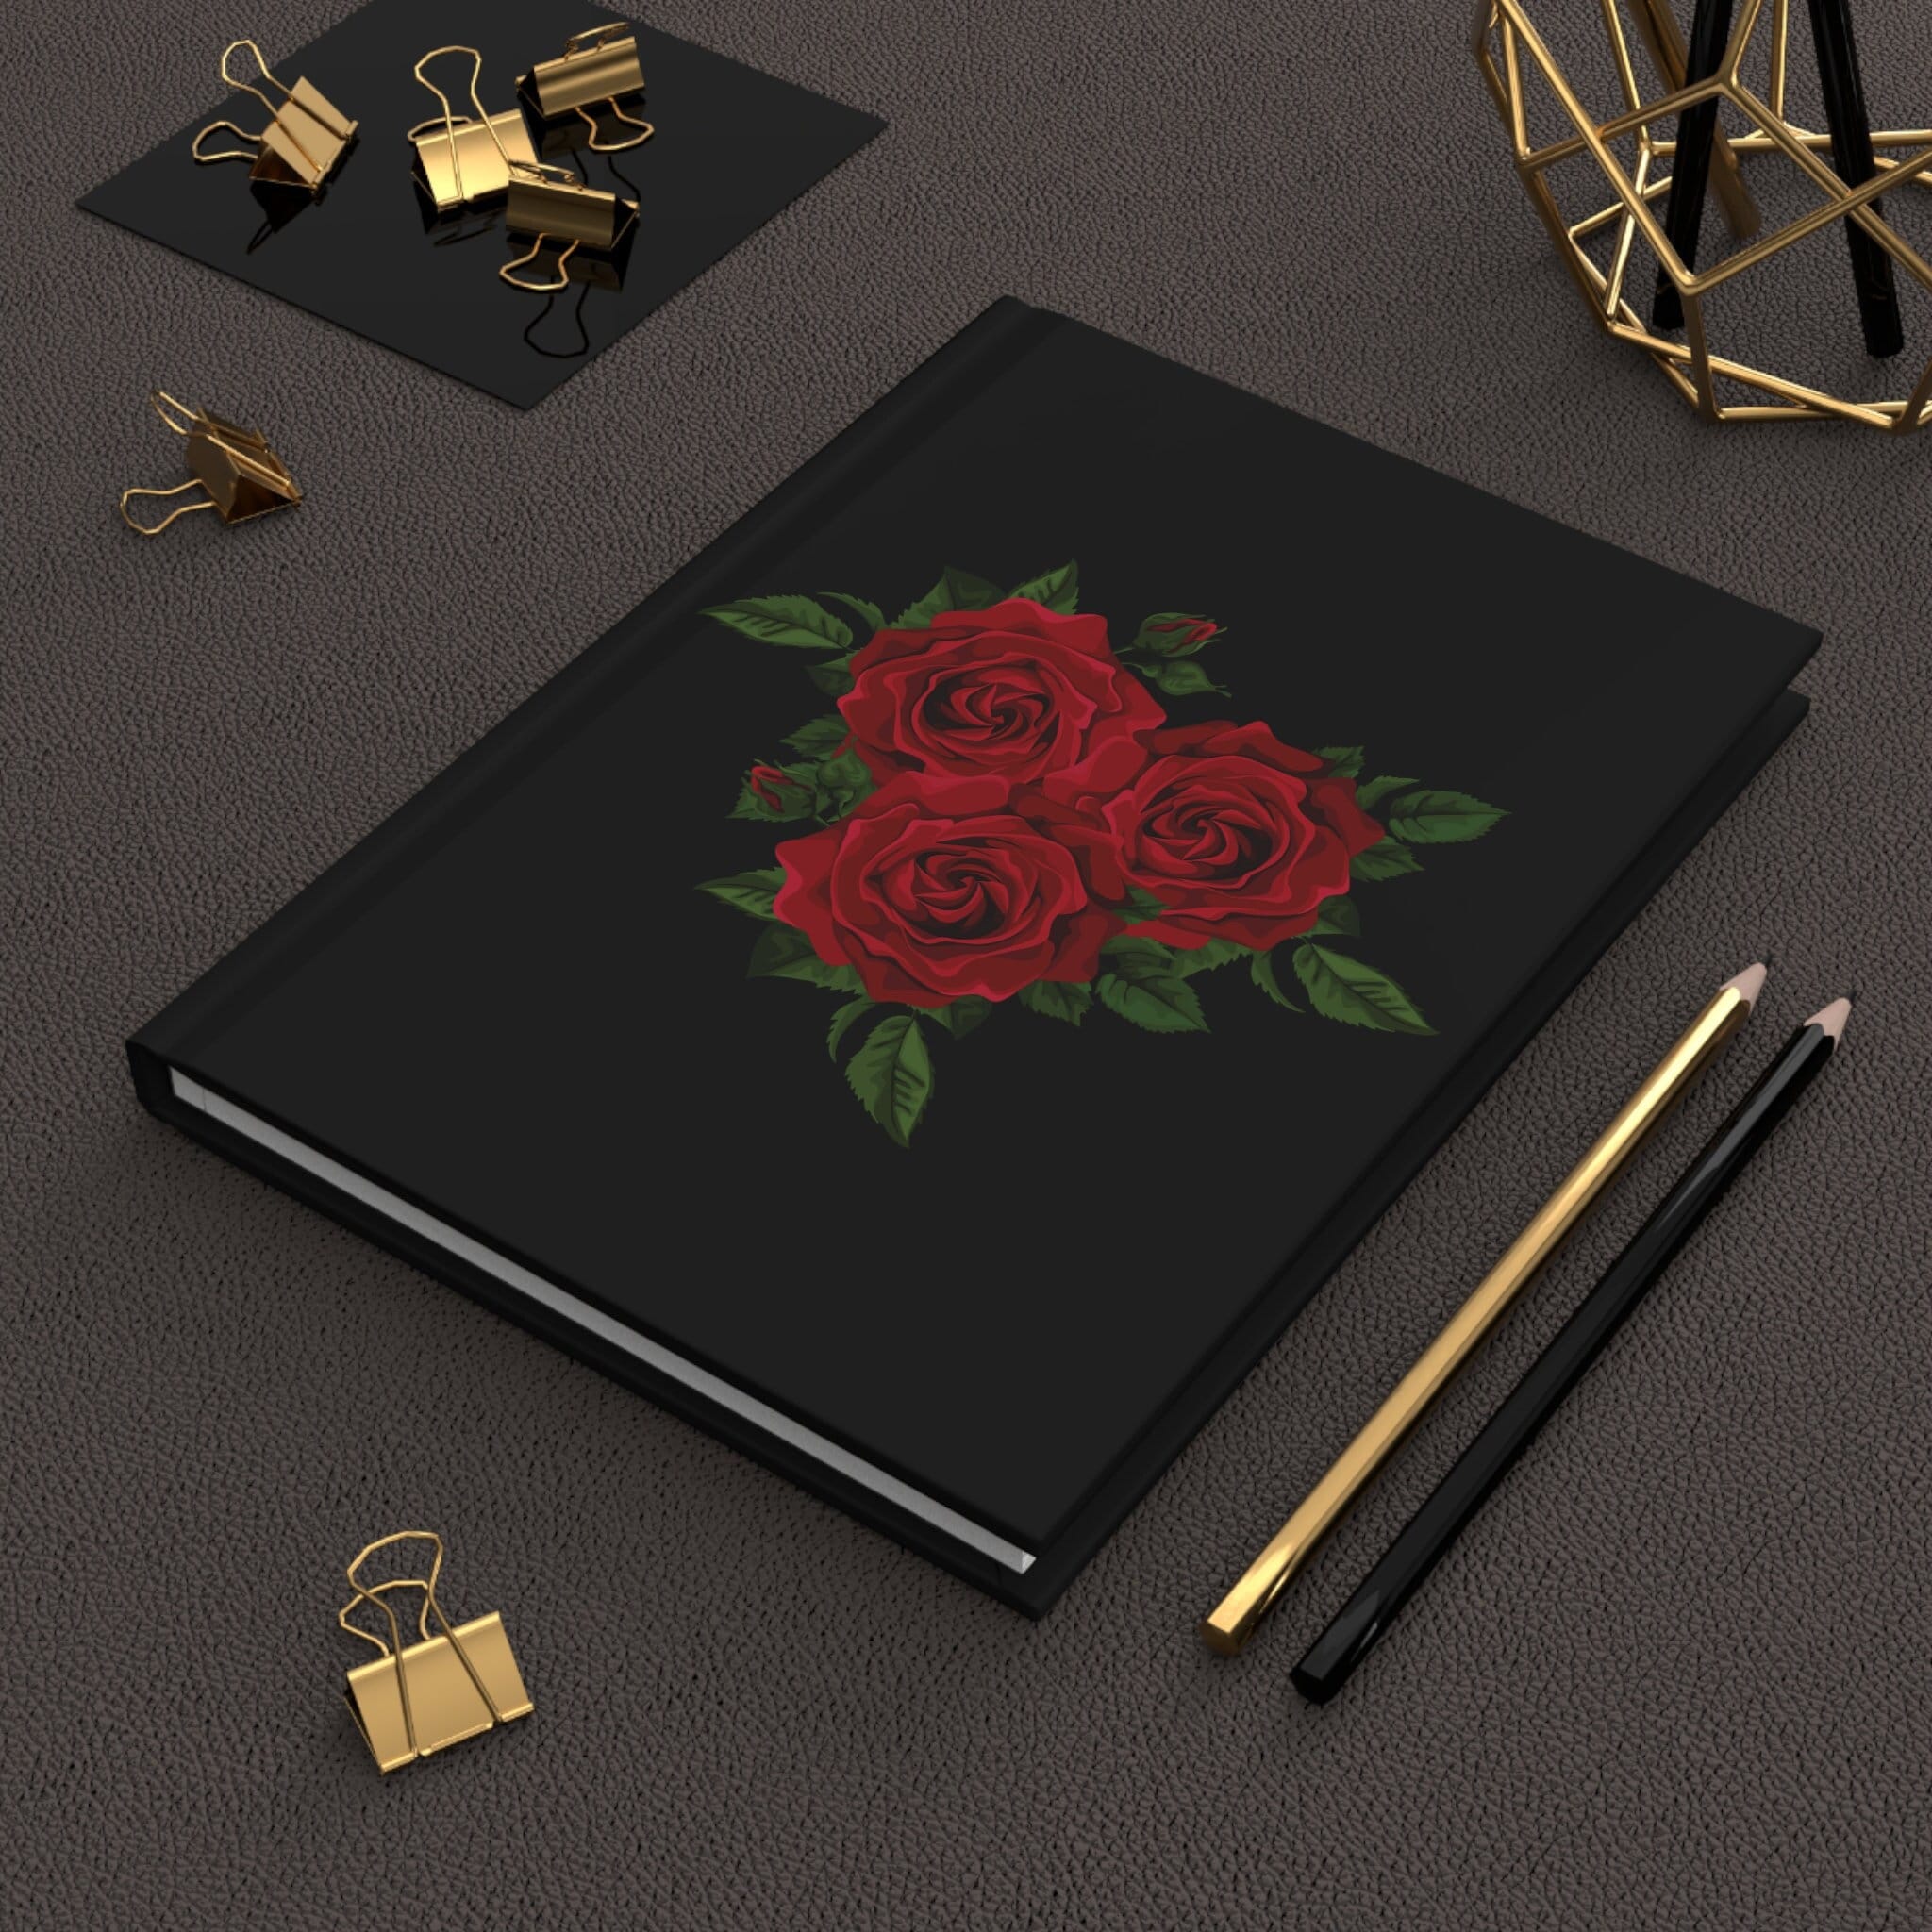 Rose Flower Leather Journal Handmade Leather Bound Notebook Office Diary Scrapbook  Small Blank Book Writing Journal Deckle Paper 5X7 